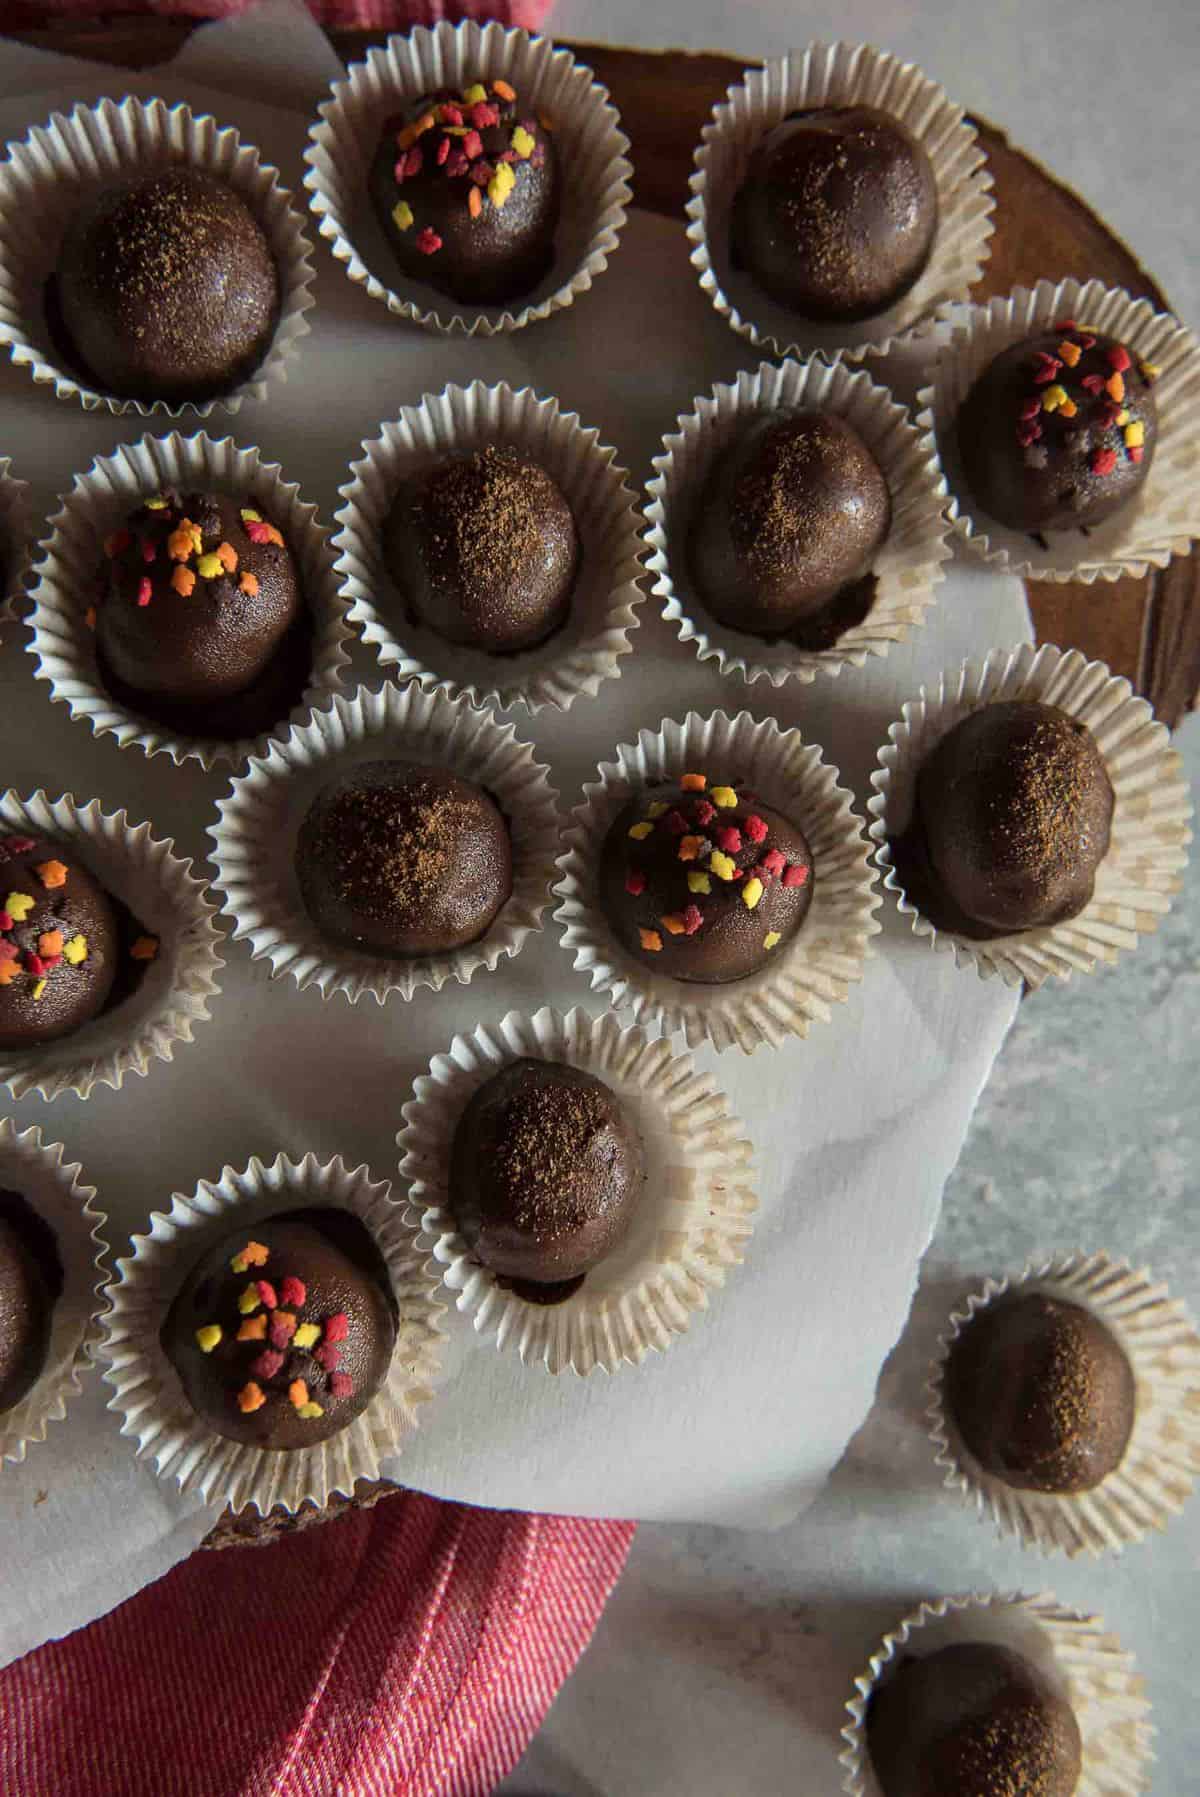 Bite-sized autumn love is found inside these dark chocolate-dipped Pumpkin Cheesecake Truffles, which make perfect party treats! 